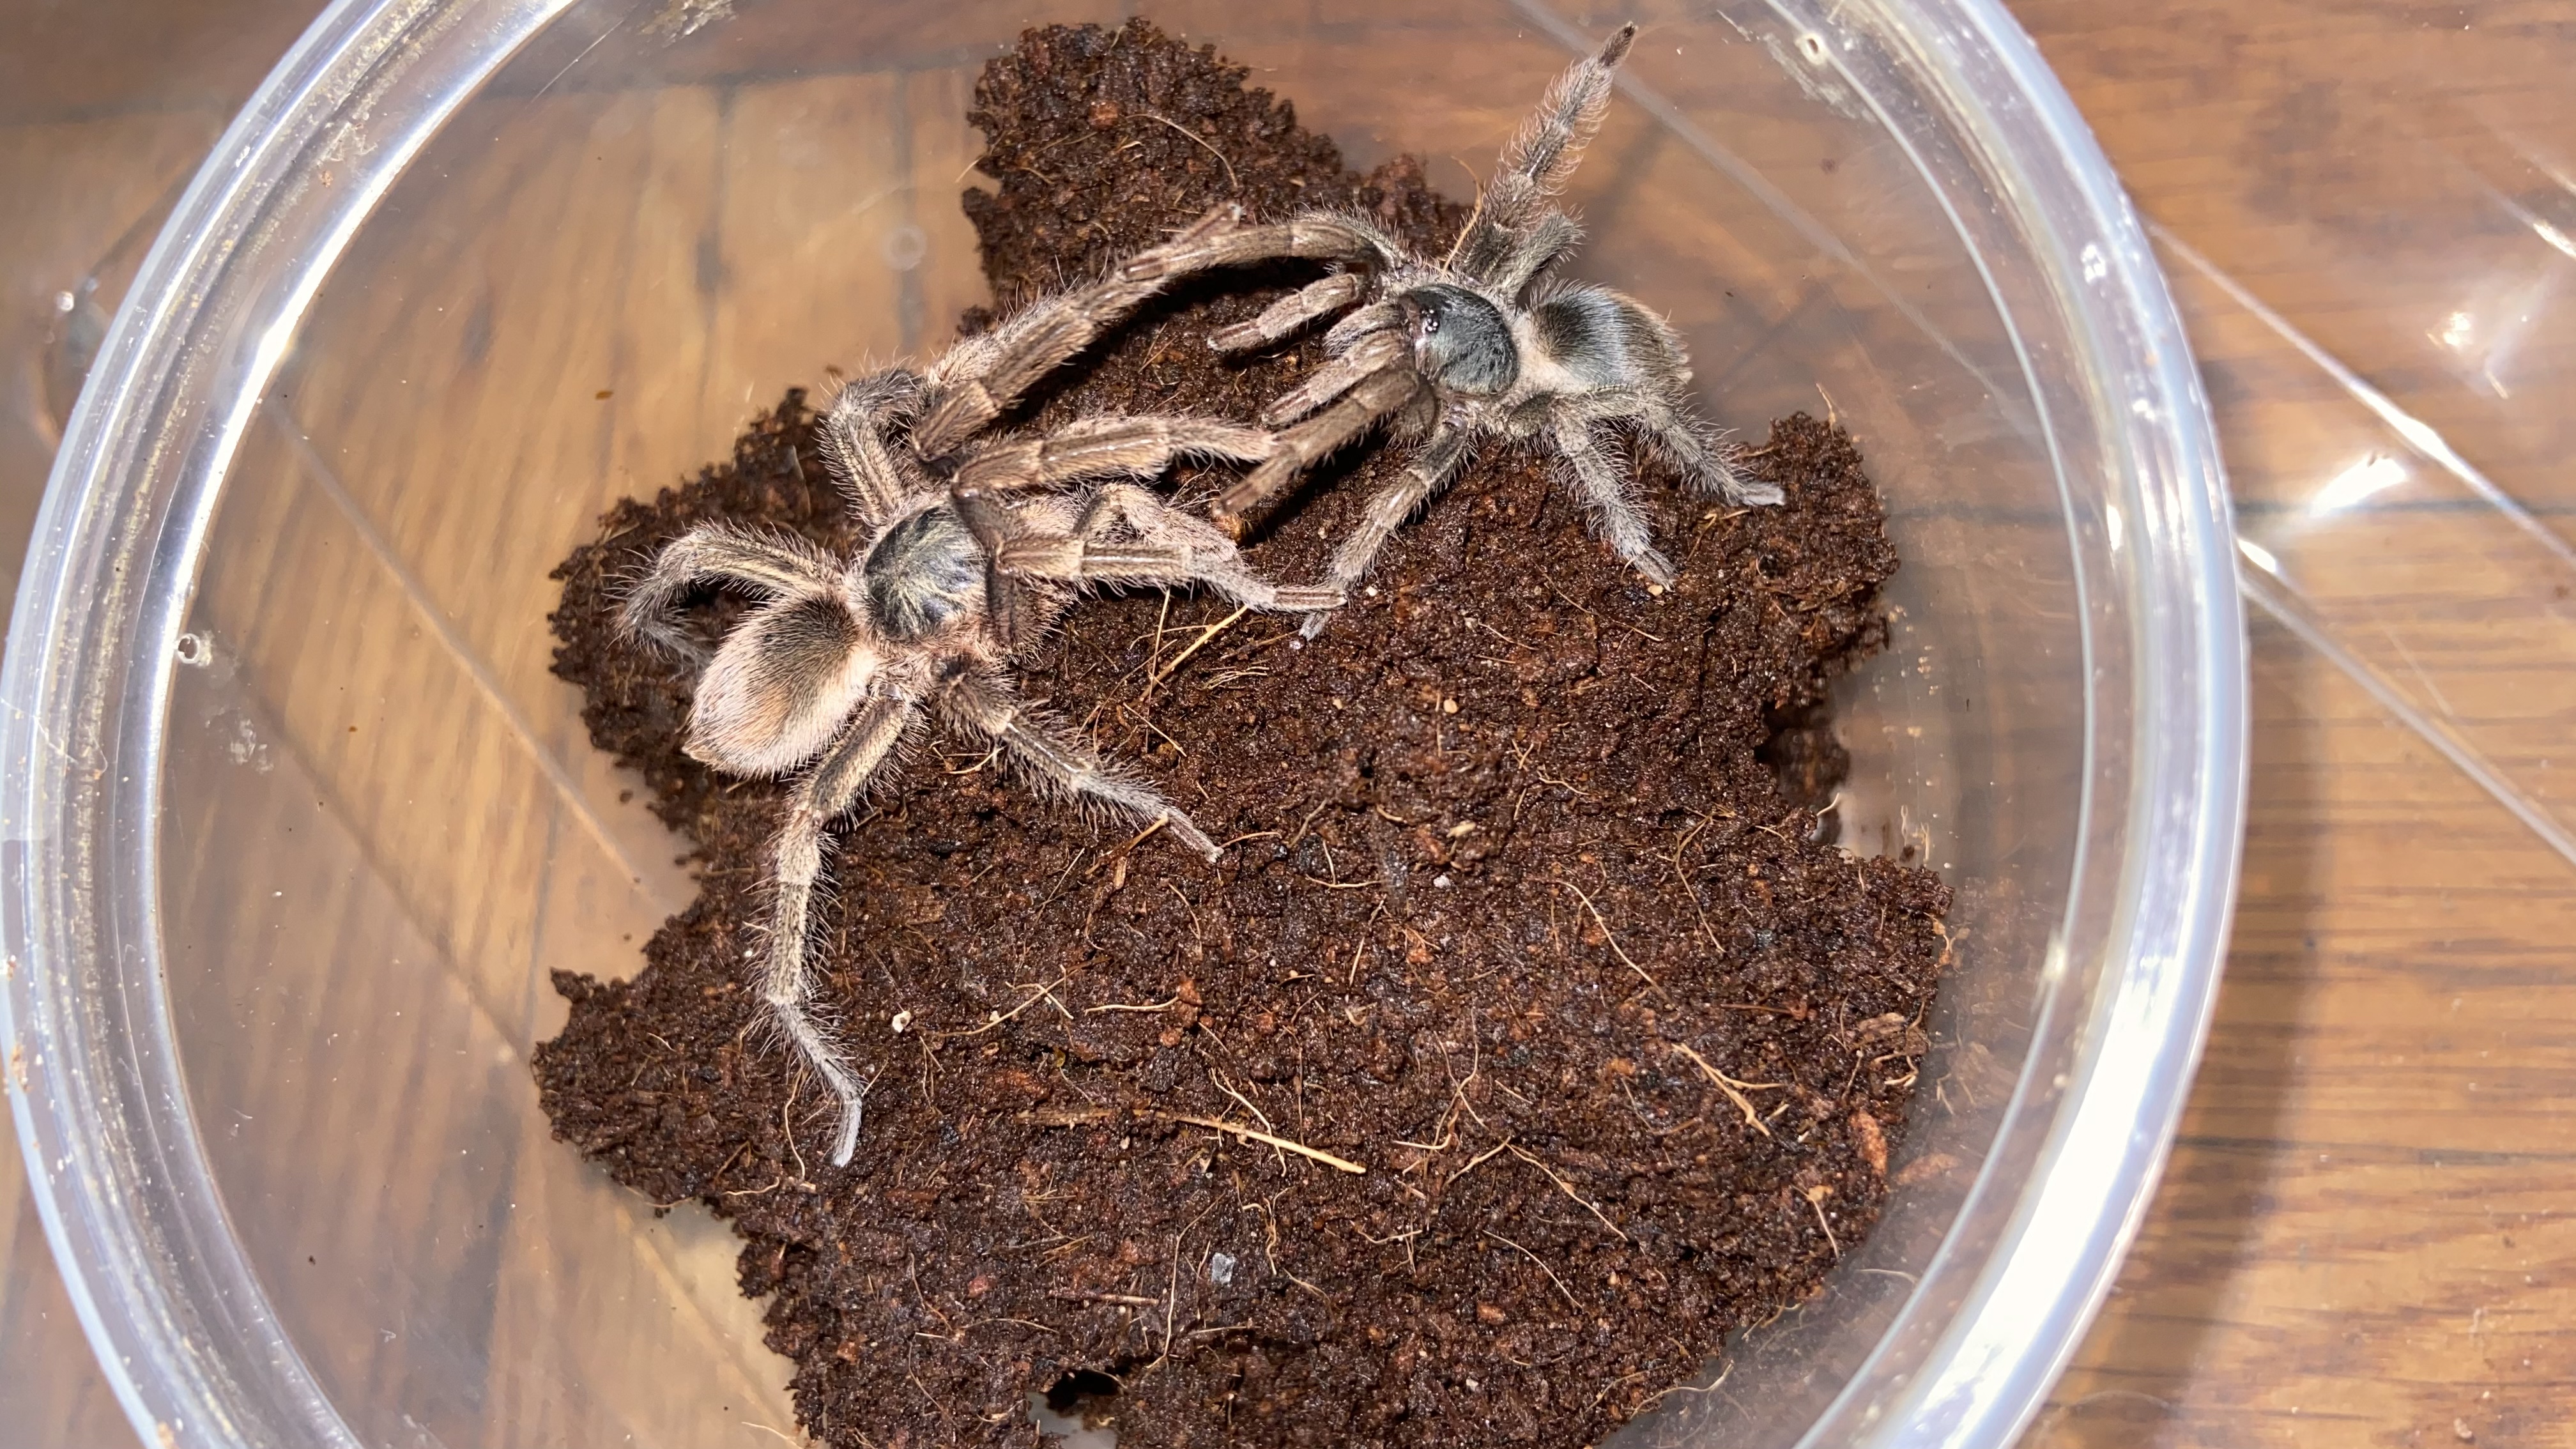 Neostenotarsus sp french guiana Pair